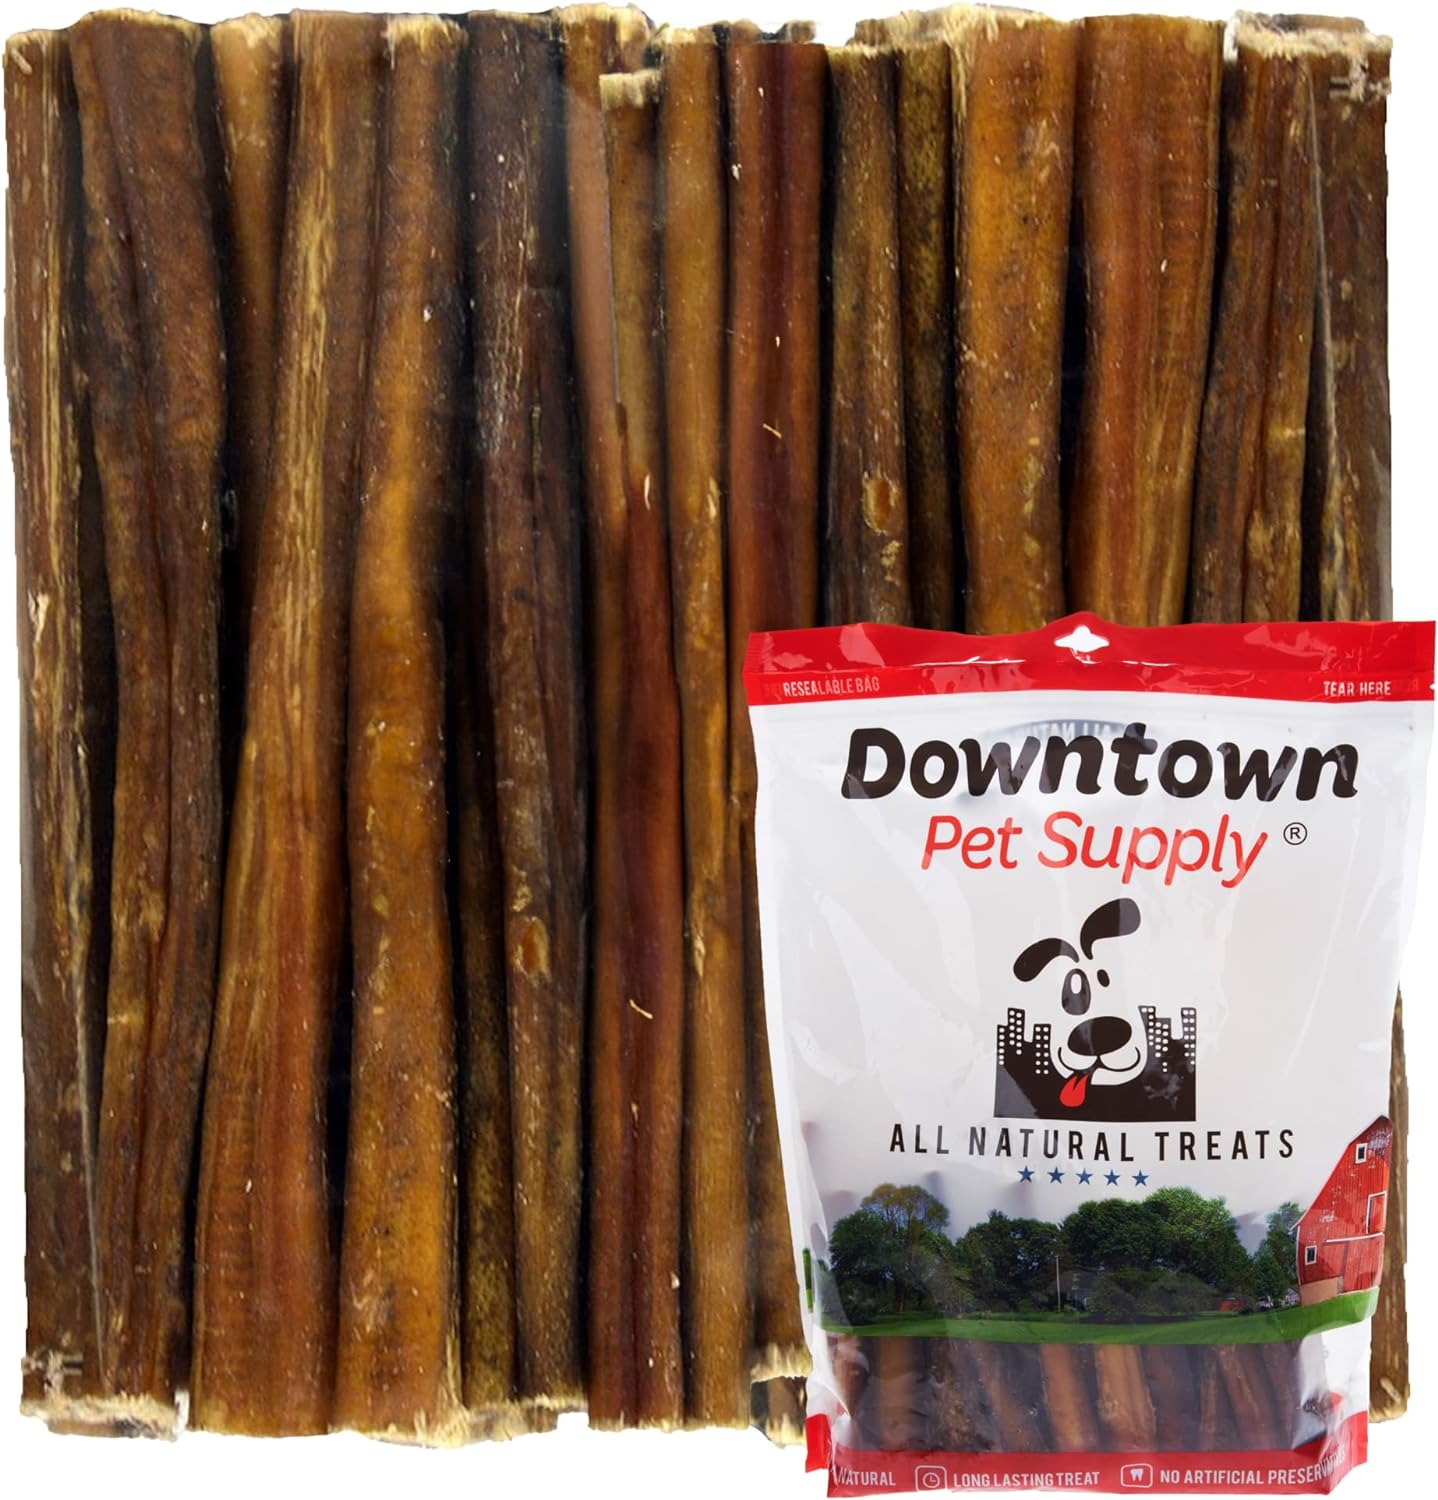 Downtown Pet Supply Bully Sticks for Dogs, Junior Size (12", 25-Pack) Rawhide Free Dog Chews Long Lasting Non-Splintering Pizzle Sticks - Low Odor Bully Sticks for Small Dogs